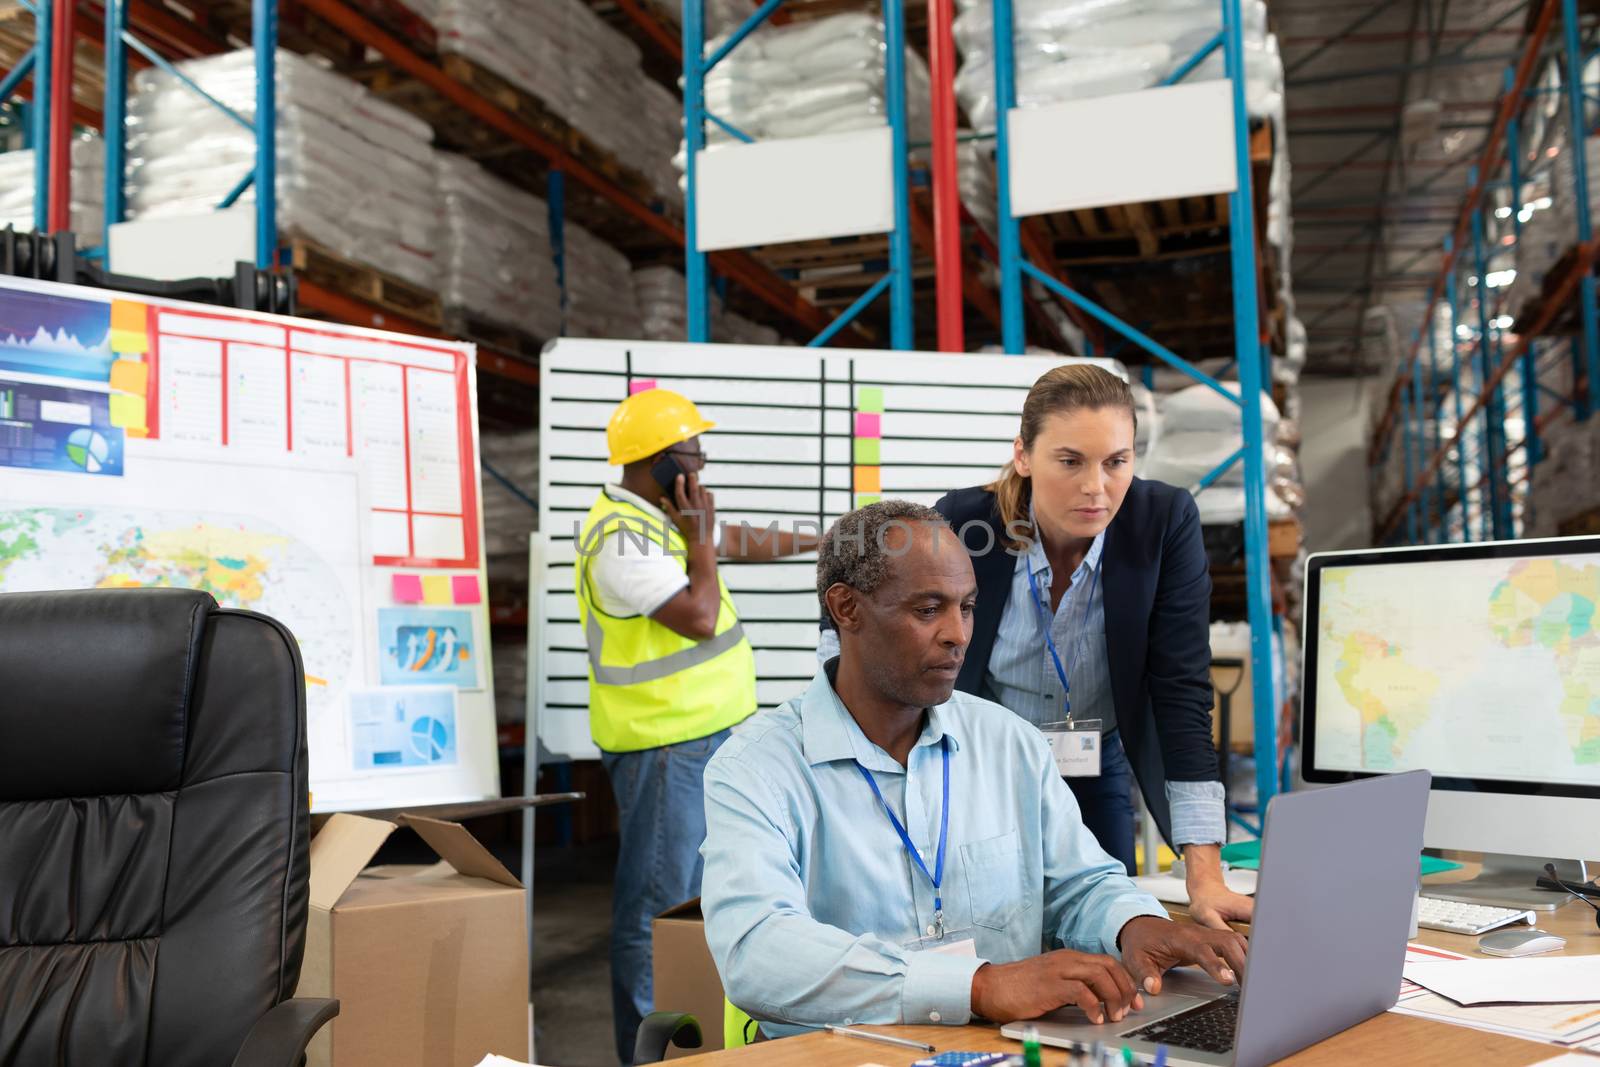 Front view of mature Caucasian female manager and African-american male supervisor working together on laptop at desk in warehouse. This is a freight transportation and distribution warehouse. Industrial and industrial workers concept